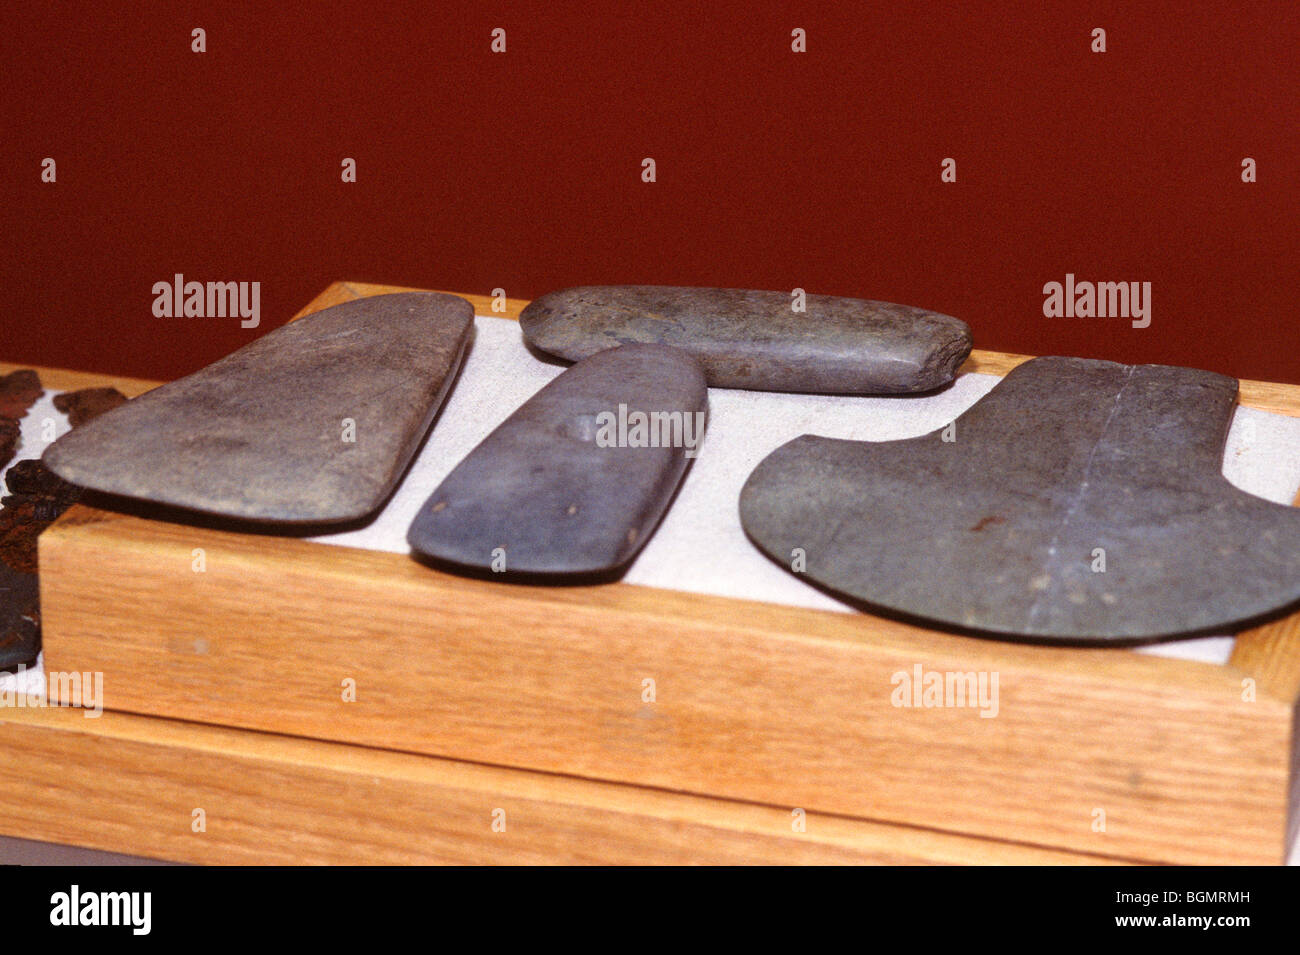 Display of stone tools, axe heads and blades that were used during 1000-1500 A.D. by the Mississippian Culture, Etowah Mounds, Cartersville Georgia Stock Photo